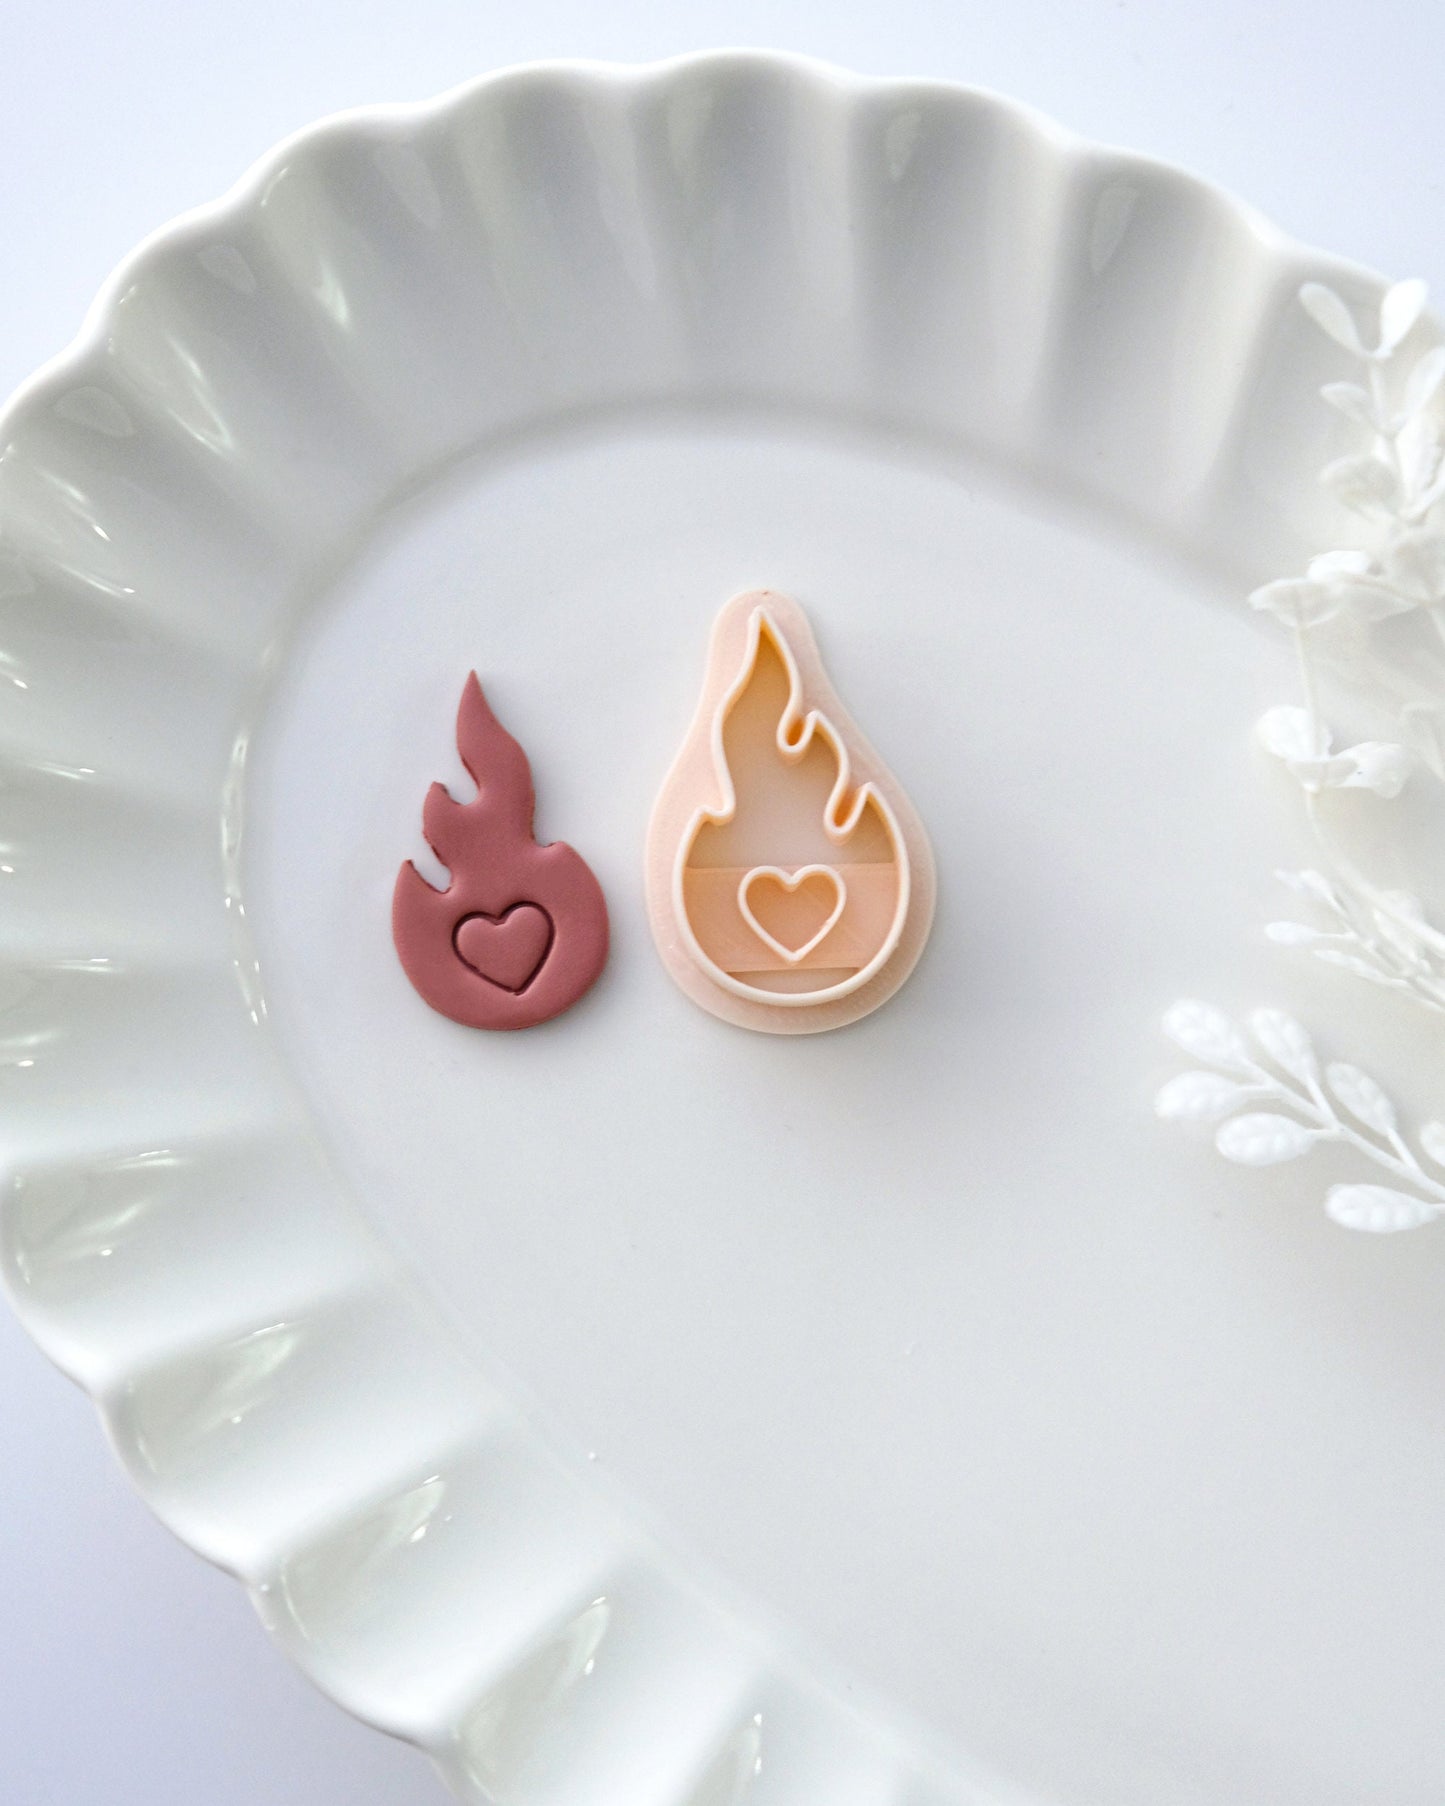 Heart On Fire Valentine's Day Clay Cutters